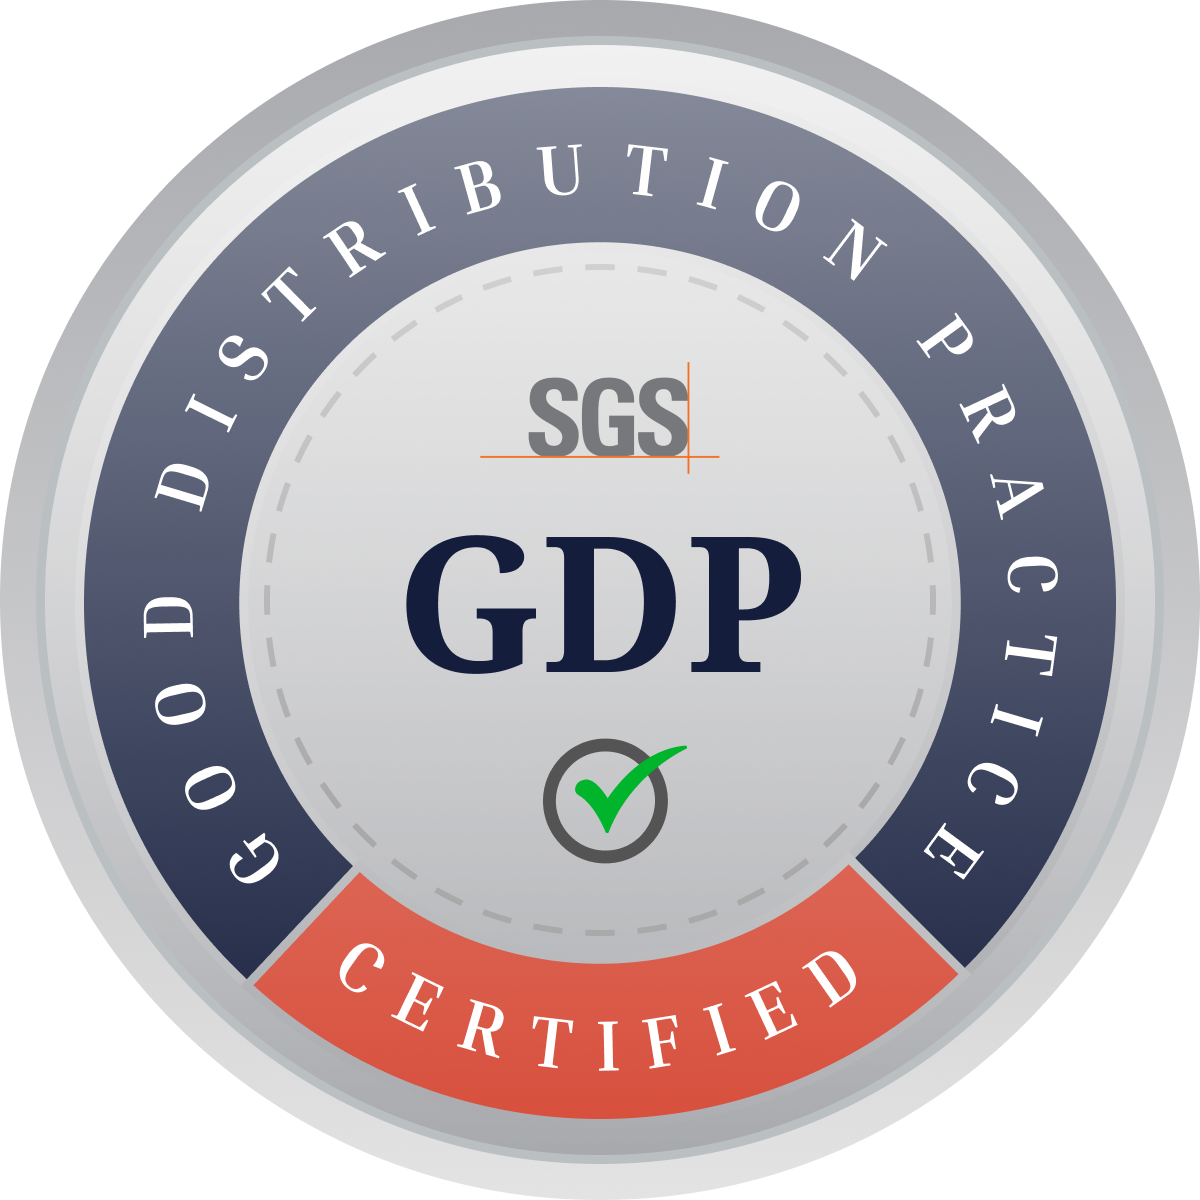 WHO GDP (Good Distribution Practices) Certification